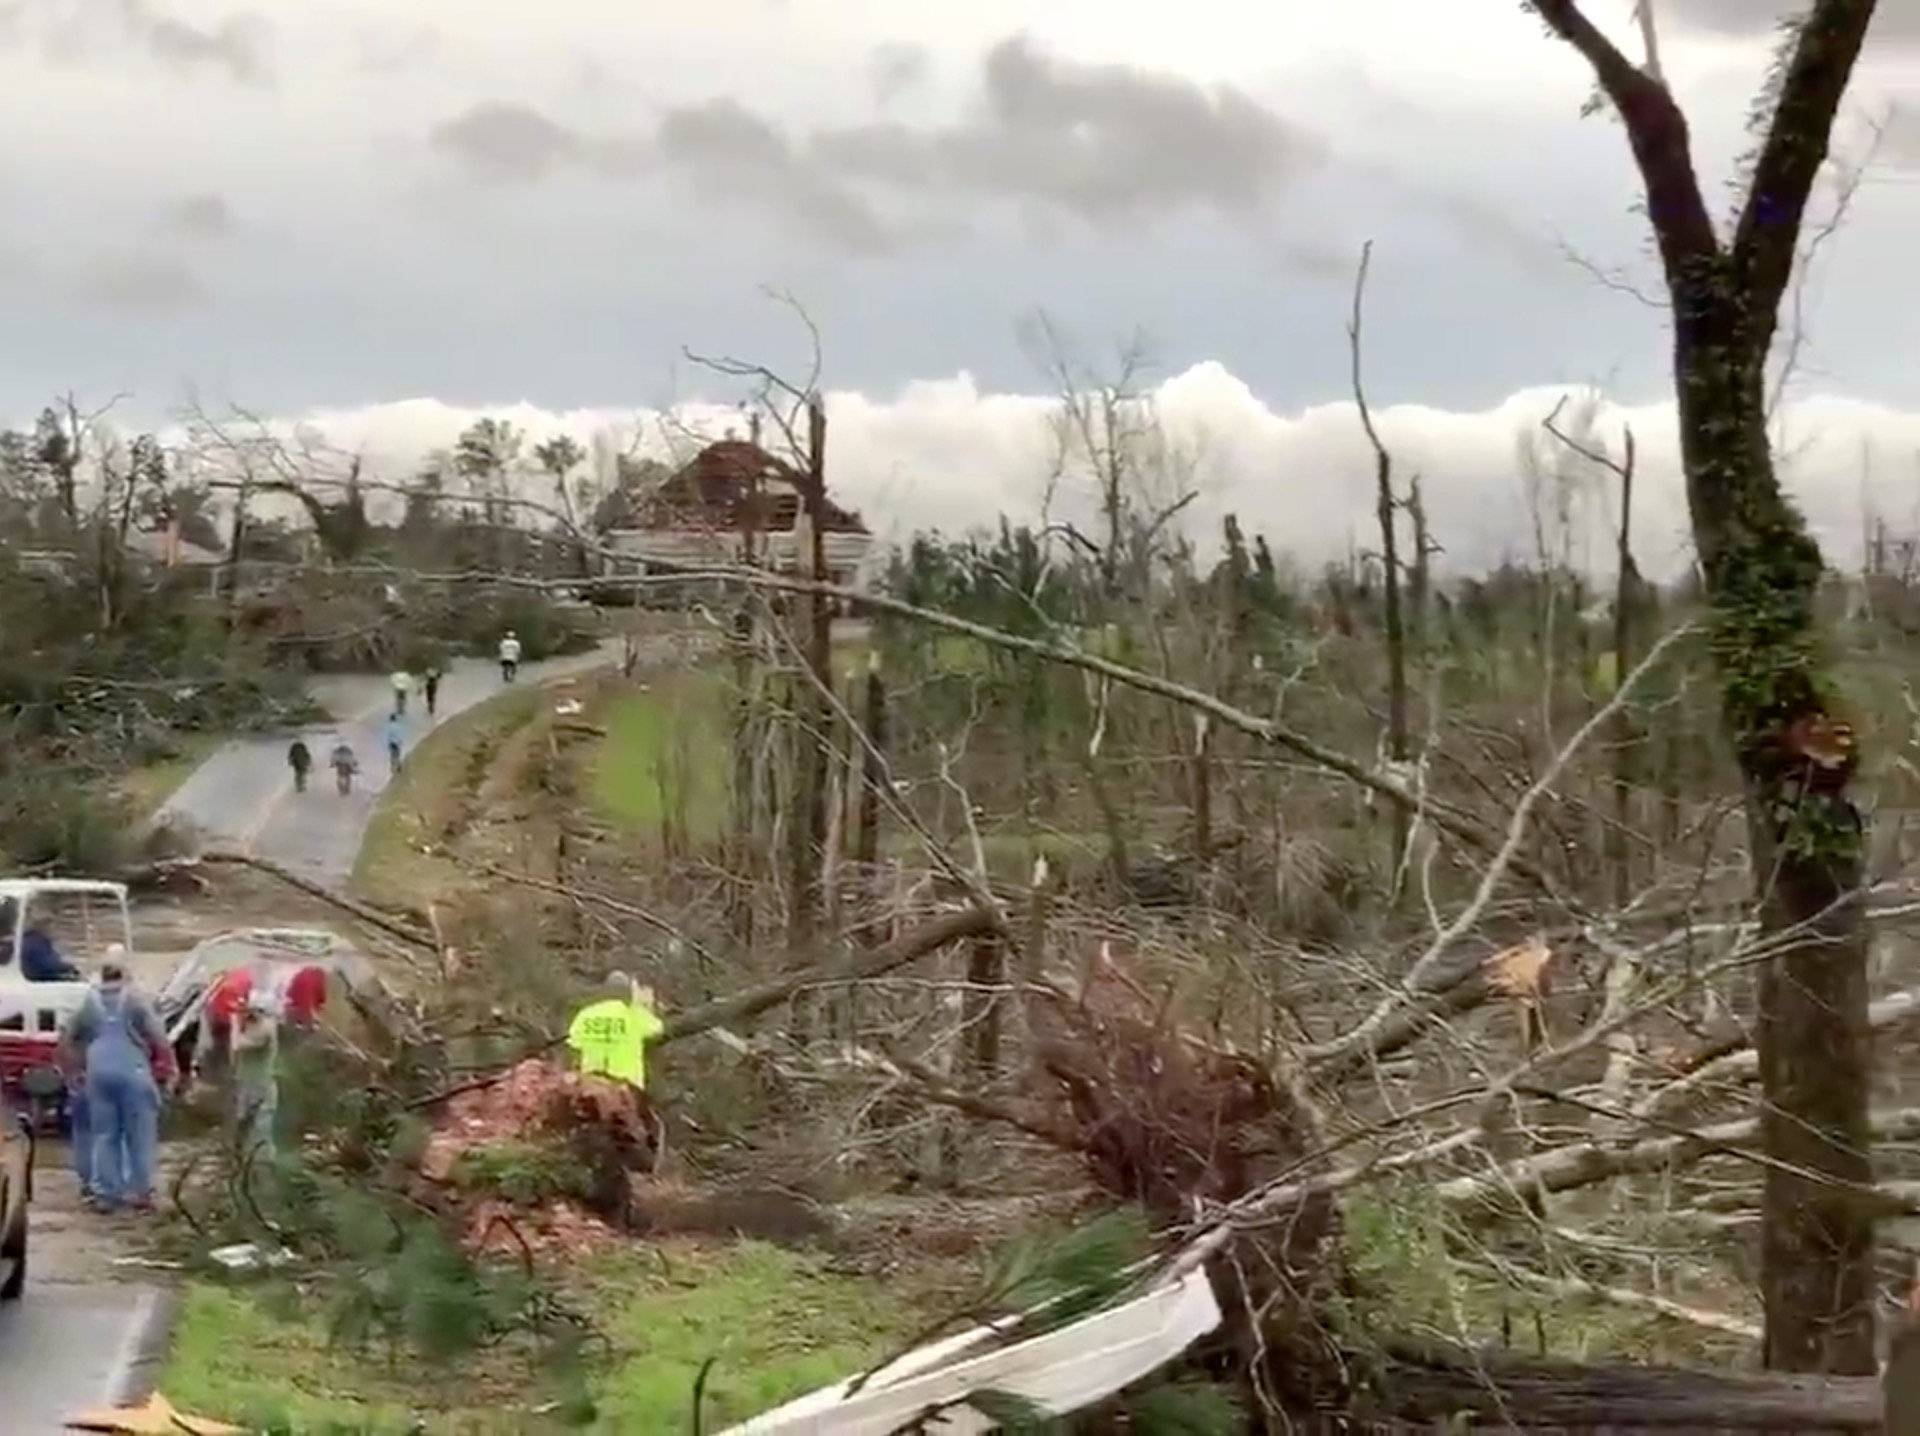 People clear fallen trees and debris on a road following a tornado in Beauregard, Alabama, U.S. in this March 3, 2019 still image obtained from social media video